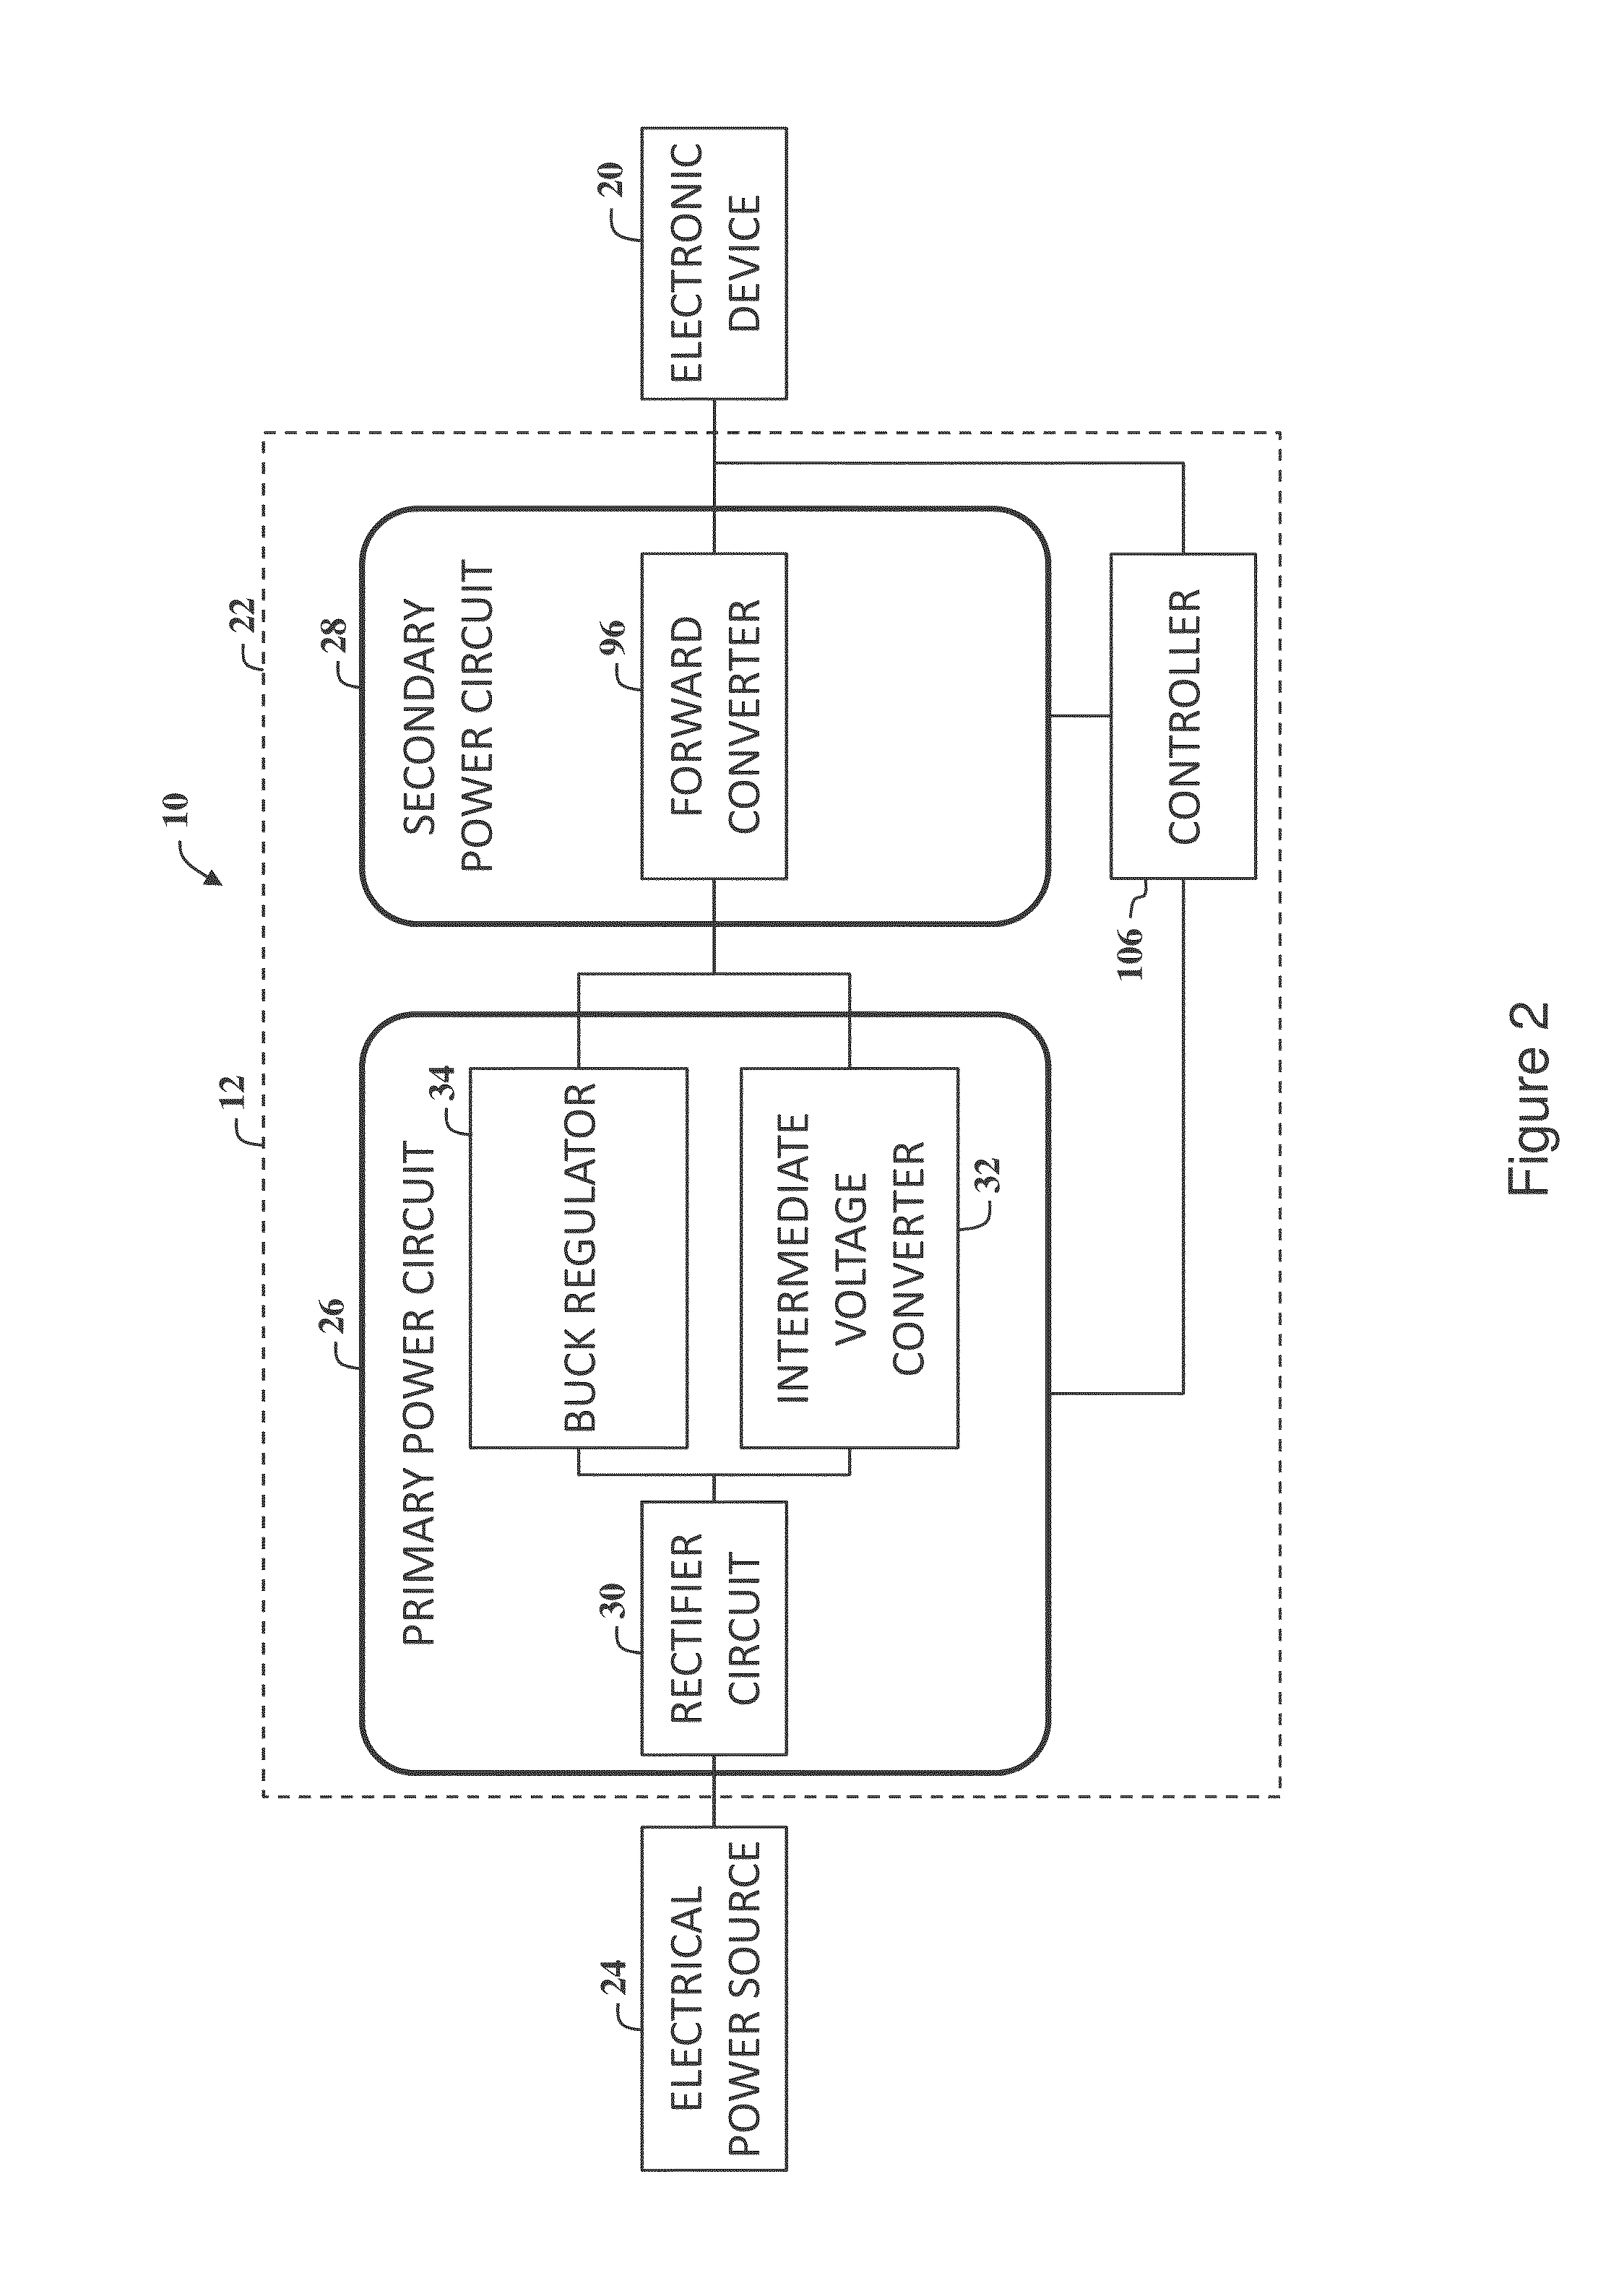 Electrical circuit for delivering power to consumer electronic devices